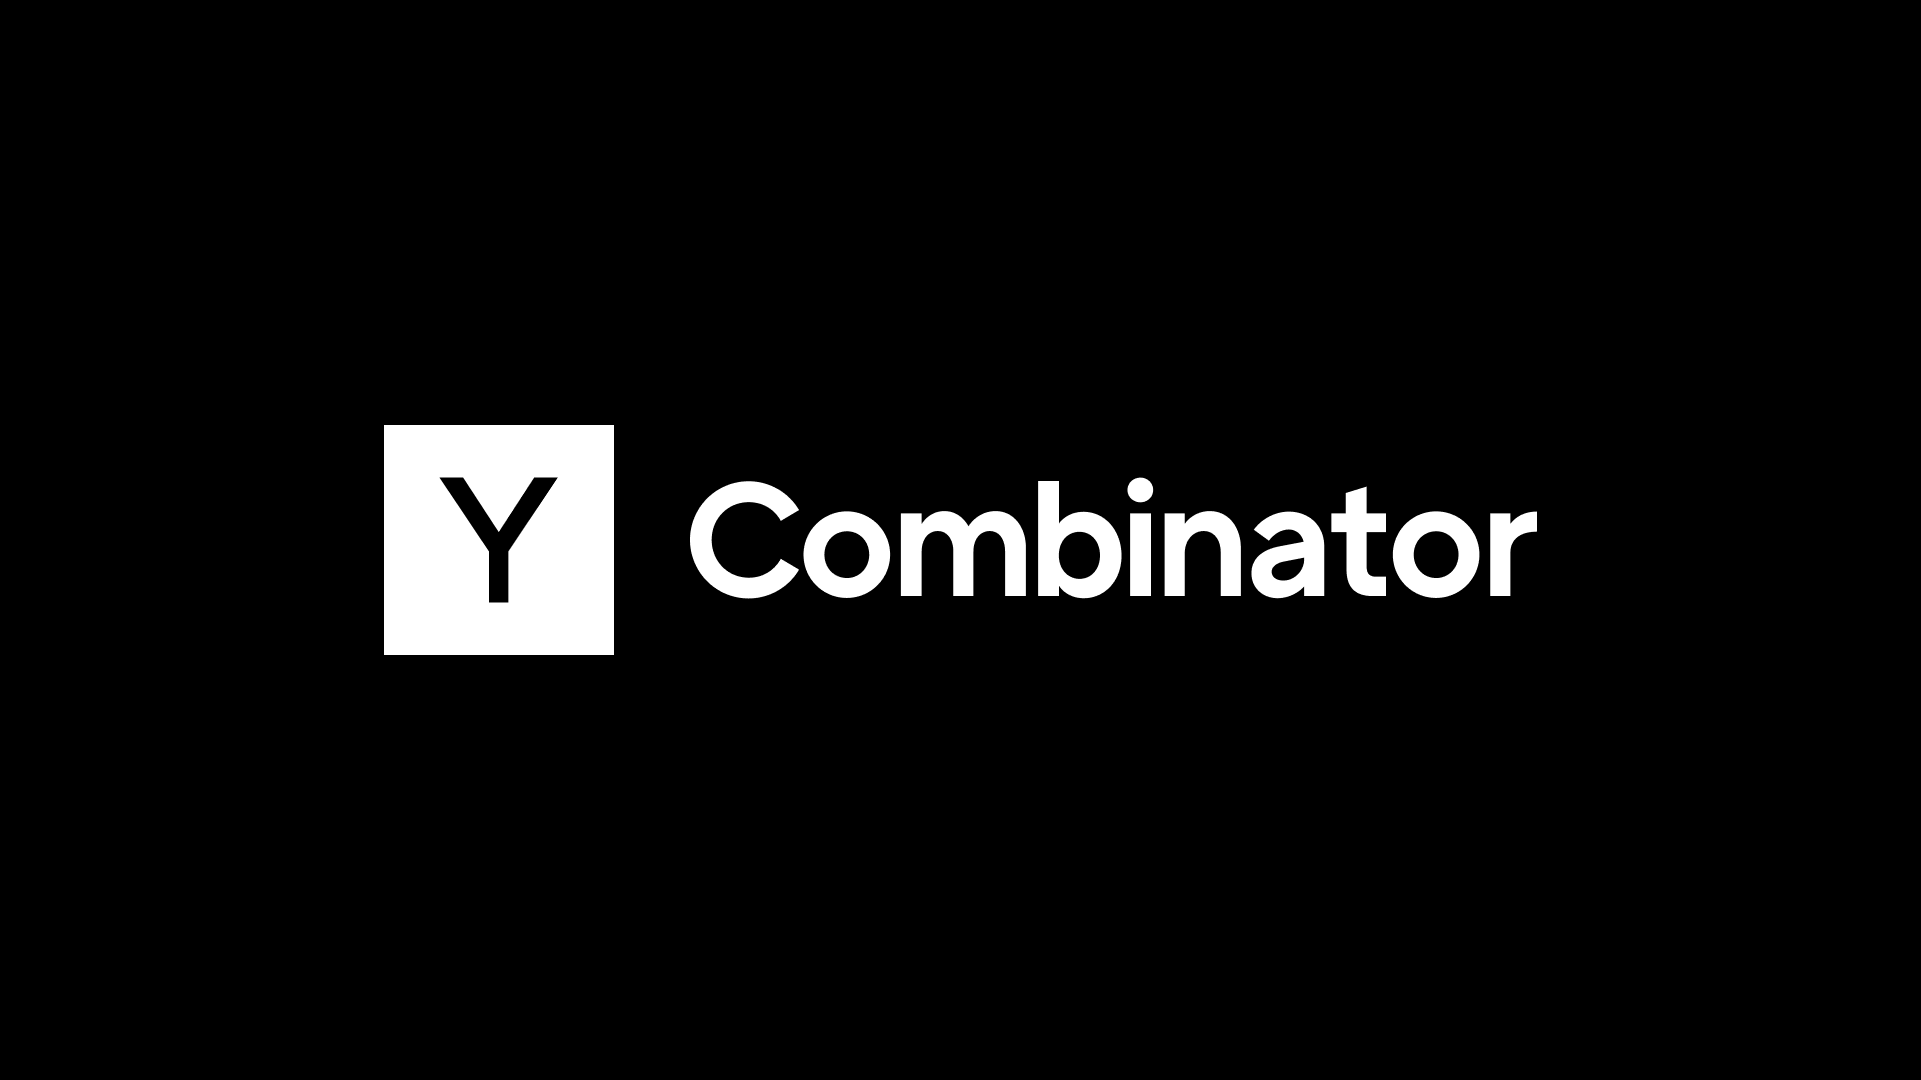 Y Combinator's Summer 2022 Cybersecurity, Privacy, and Trust Startups